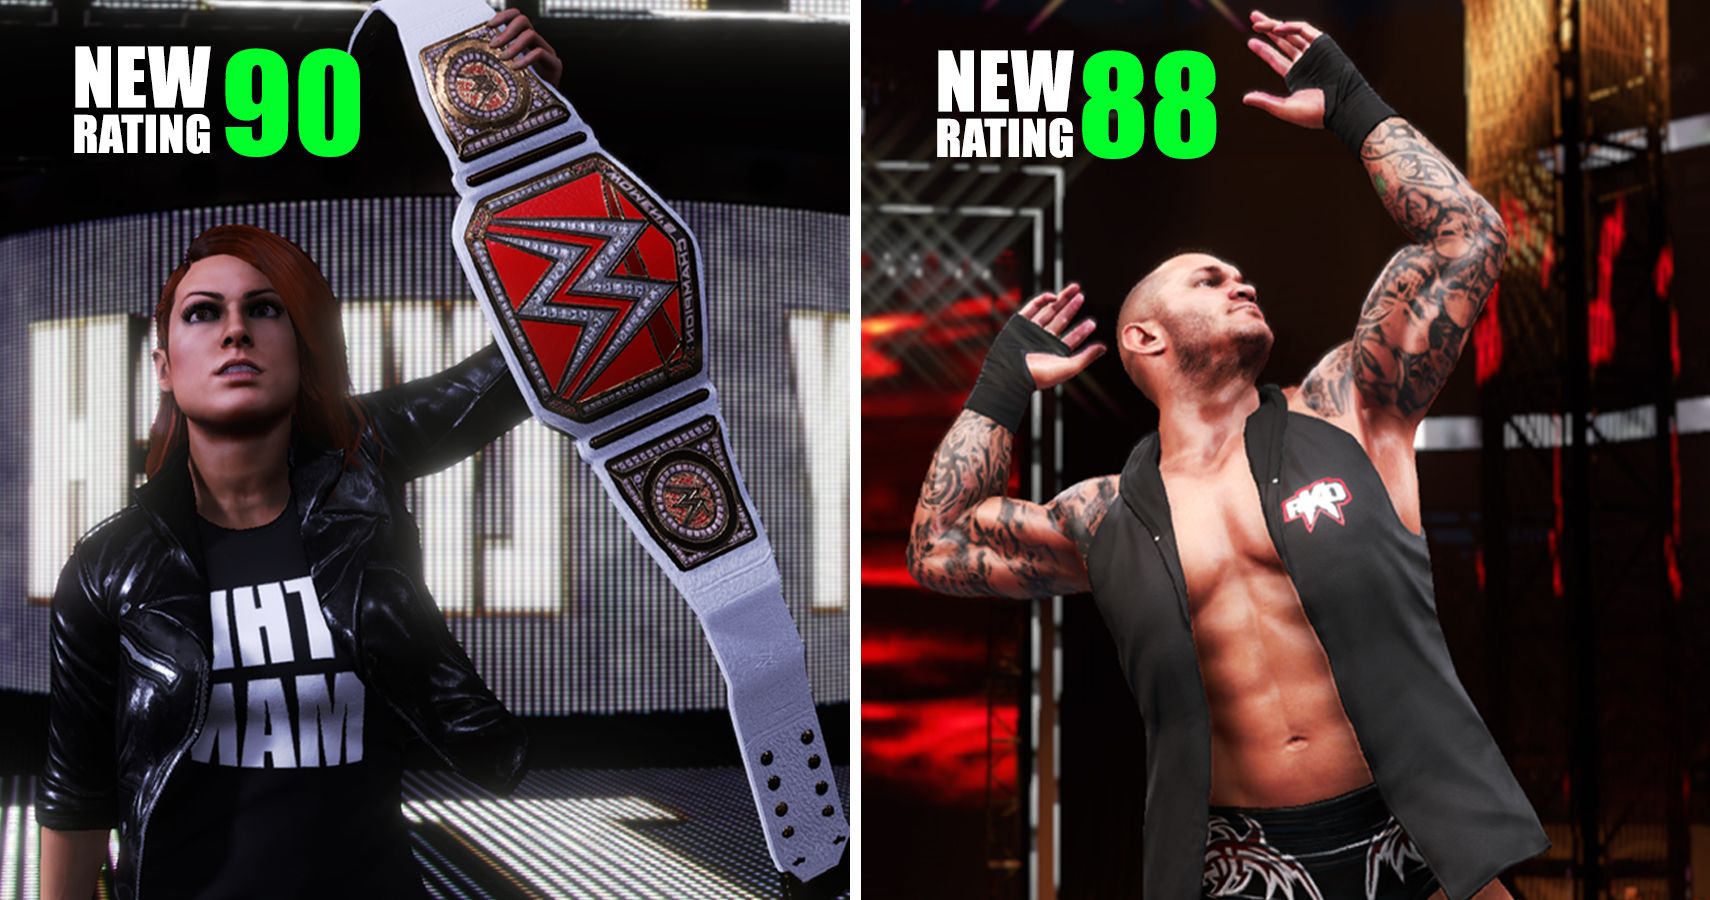 WWE-2K20-Improved-Superstars-Featured-Image-Rating-Becky-Lynch-Randy-Orton